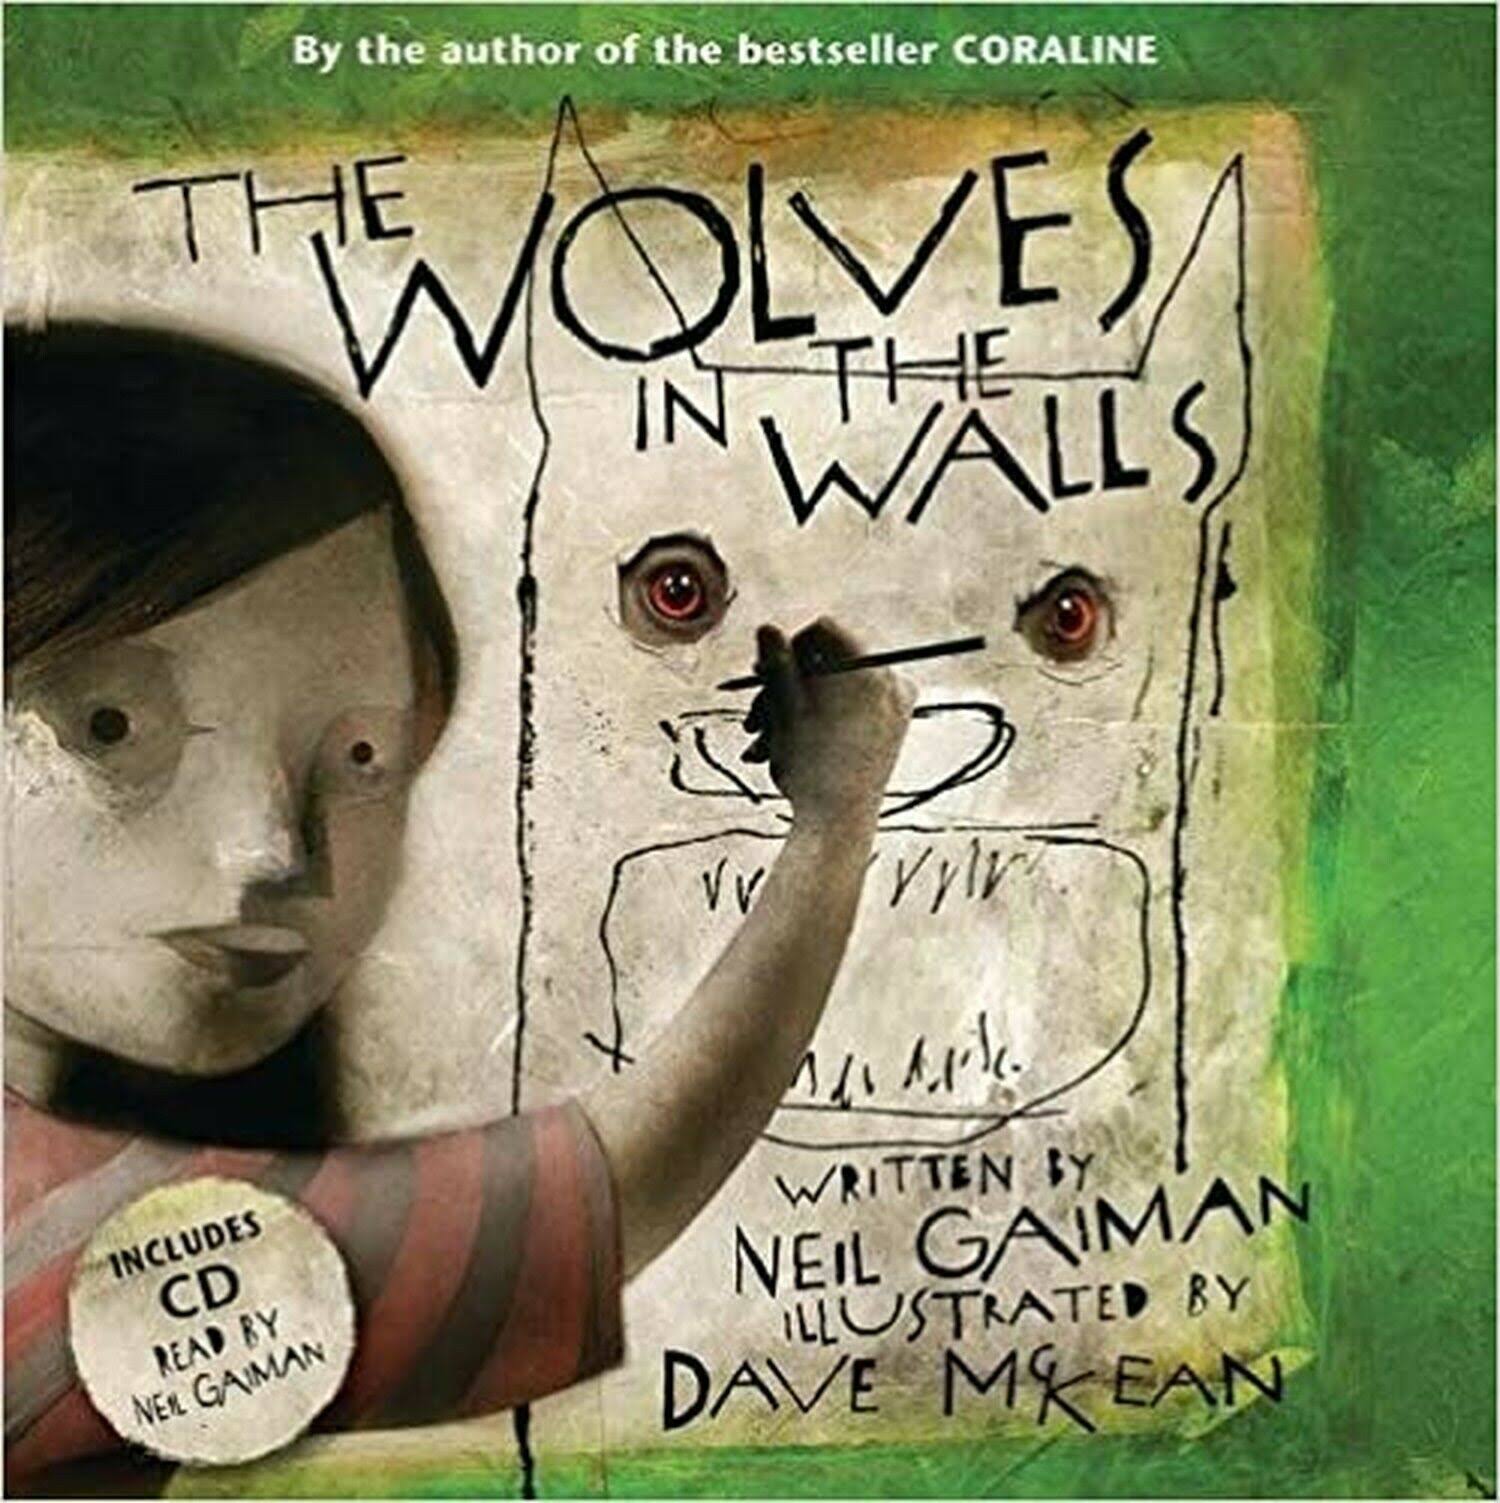 The Wolves in the Walls, Neil Gaiman